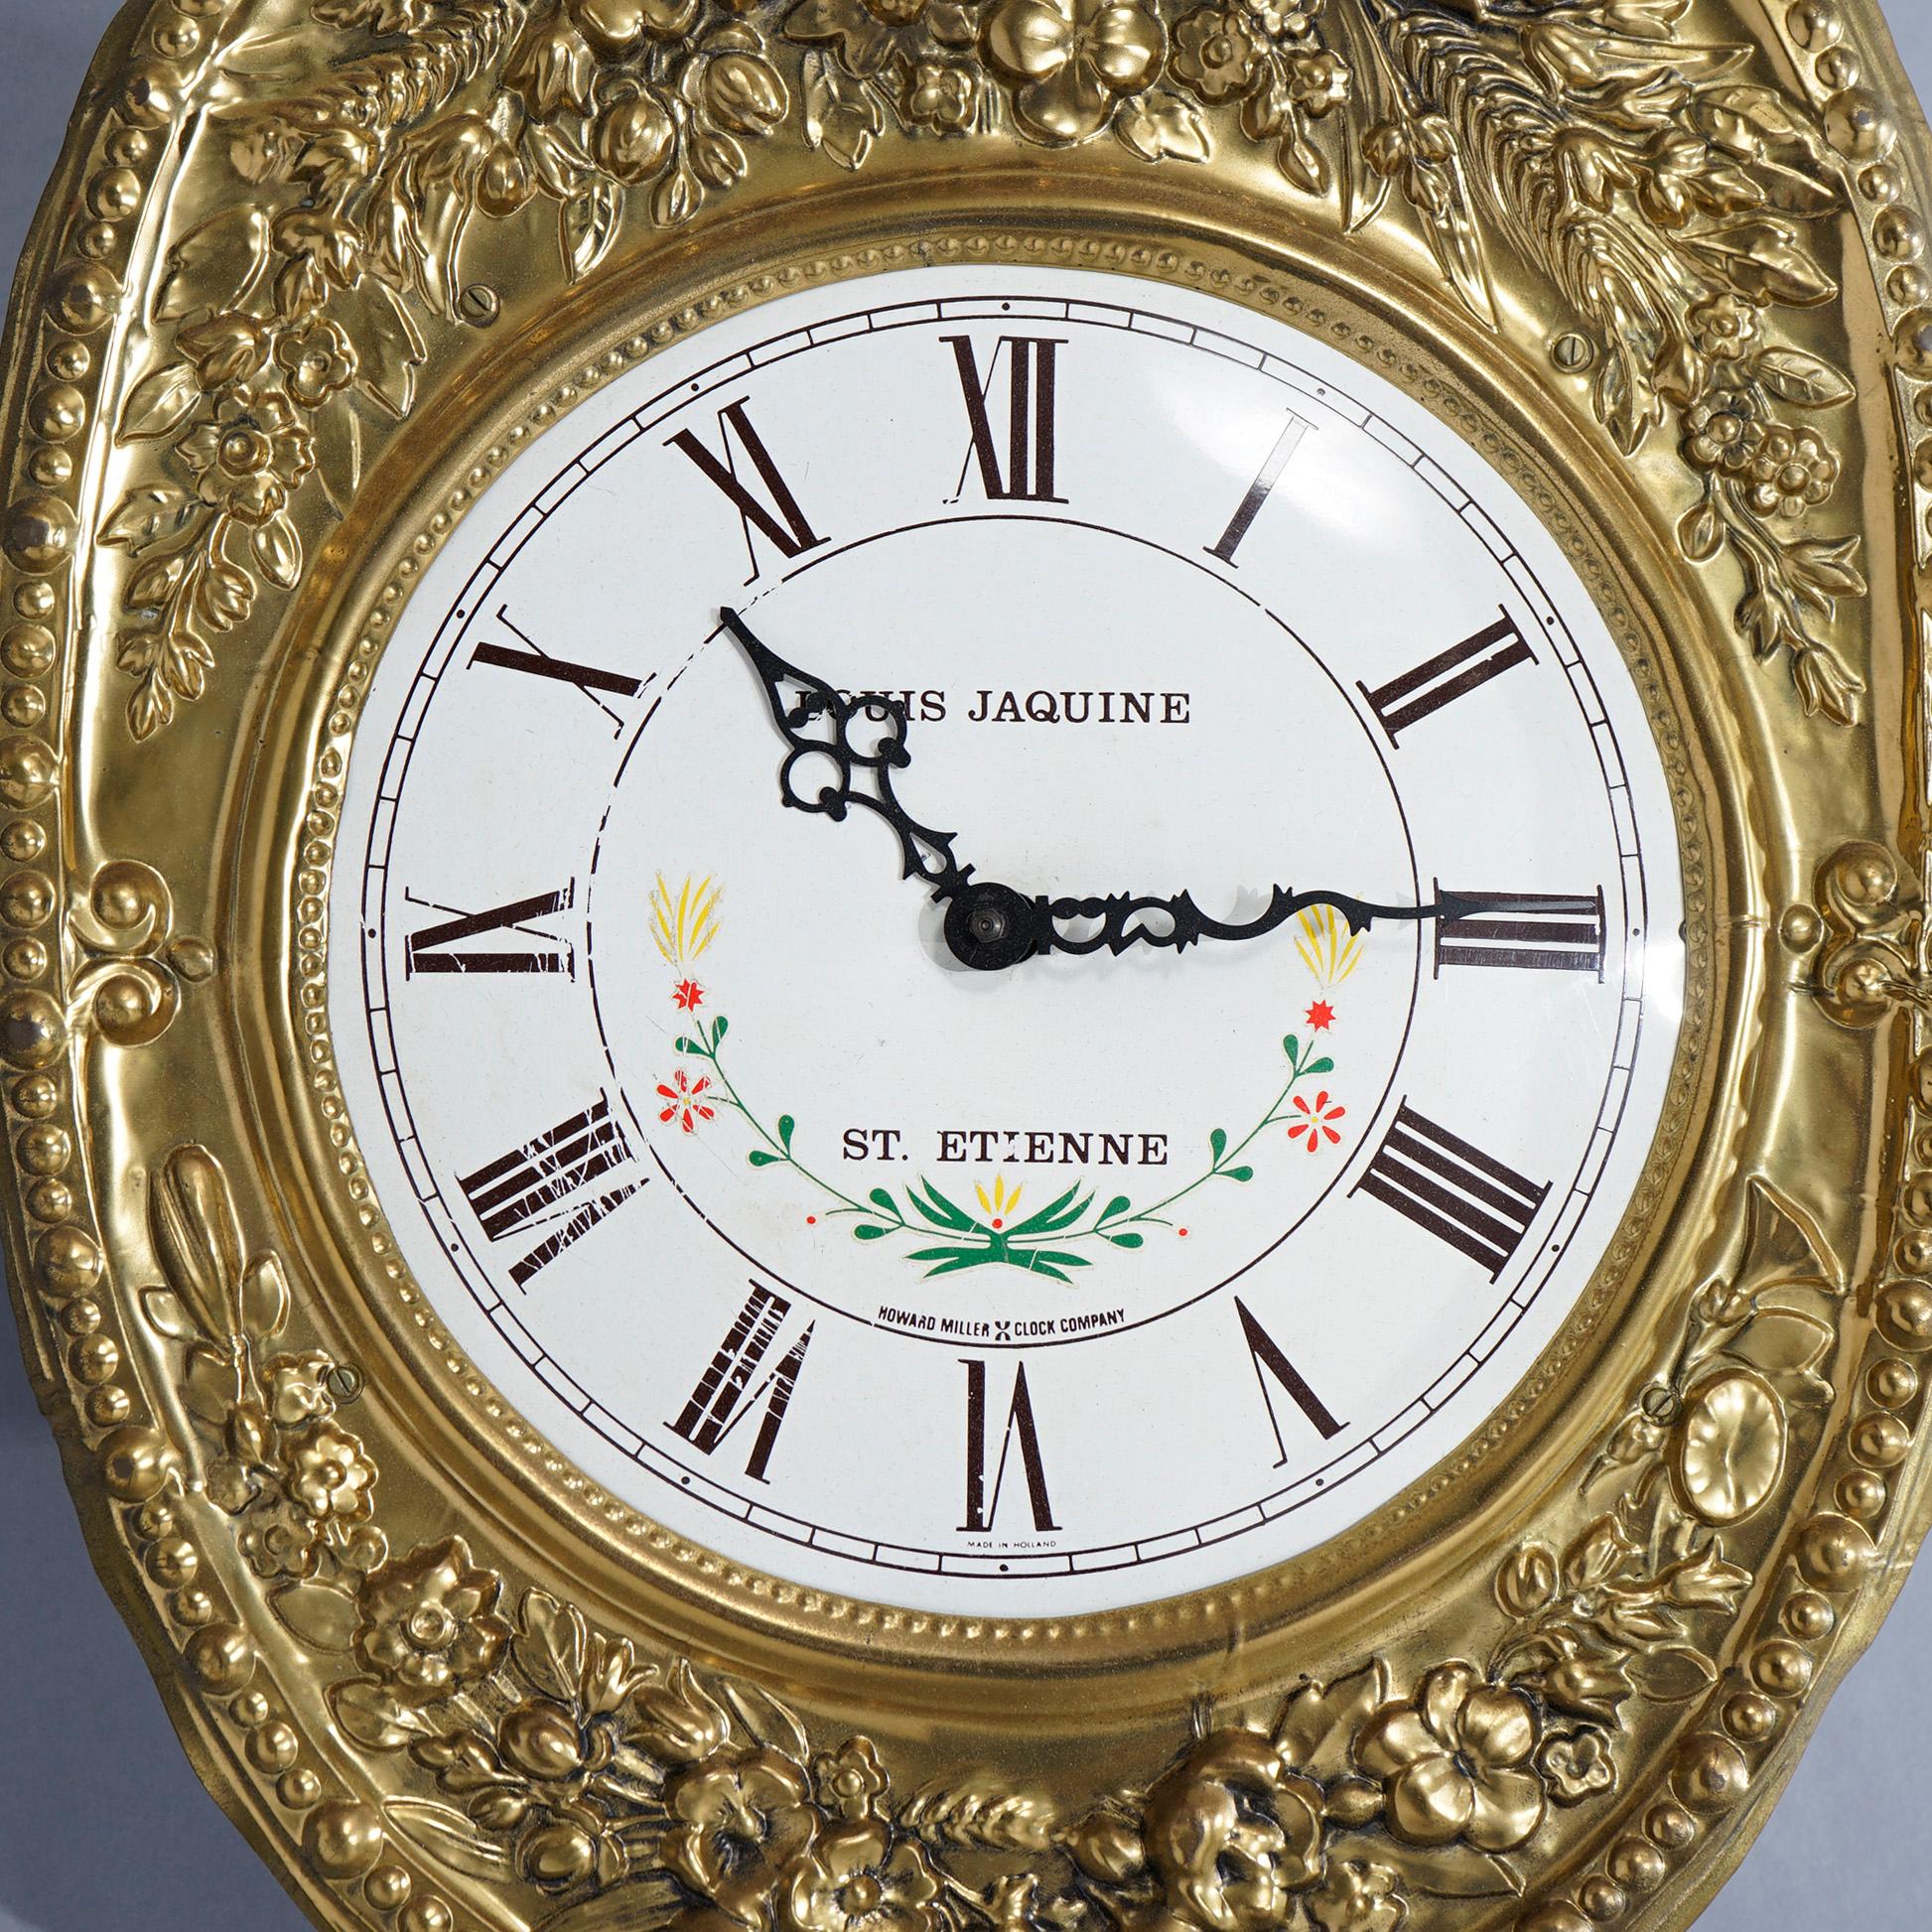 An antique French wag-on-the-wall clock offers brass construction with floral and foliate embossed frame, face with Roman numerals and floral decoration, signed on face as photographed, 19th century

Measures- 58.25'' H x 14.25'' W x 5.75'' D.